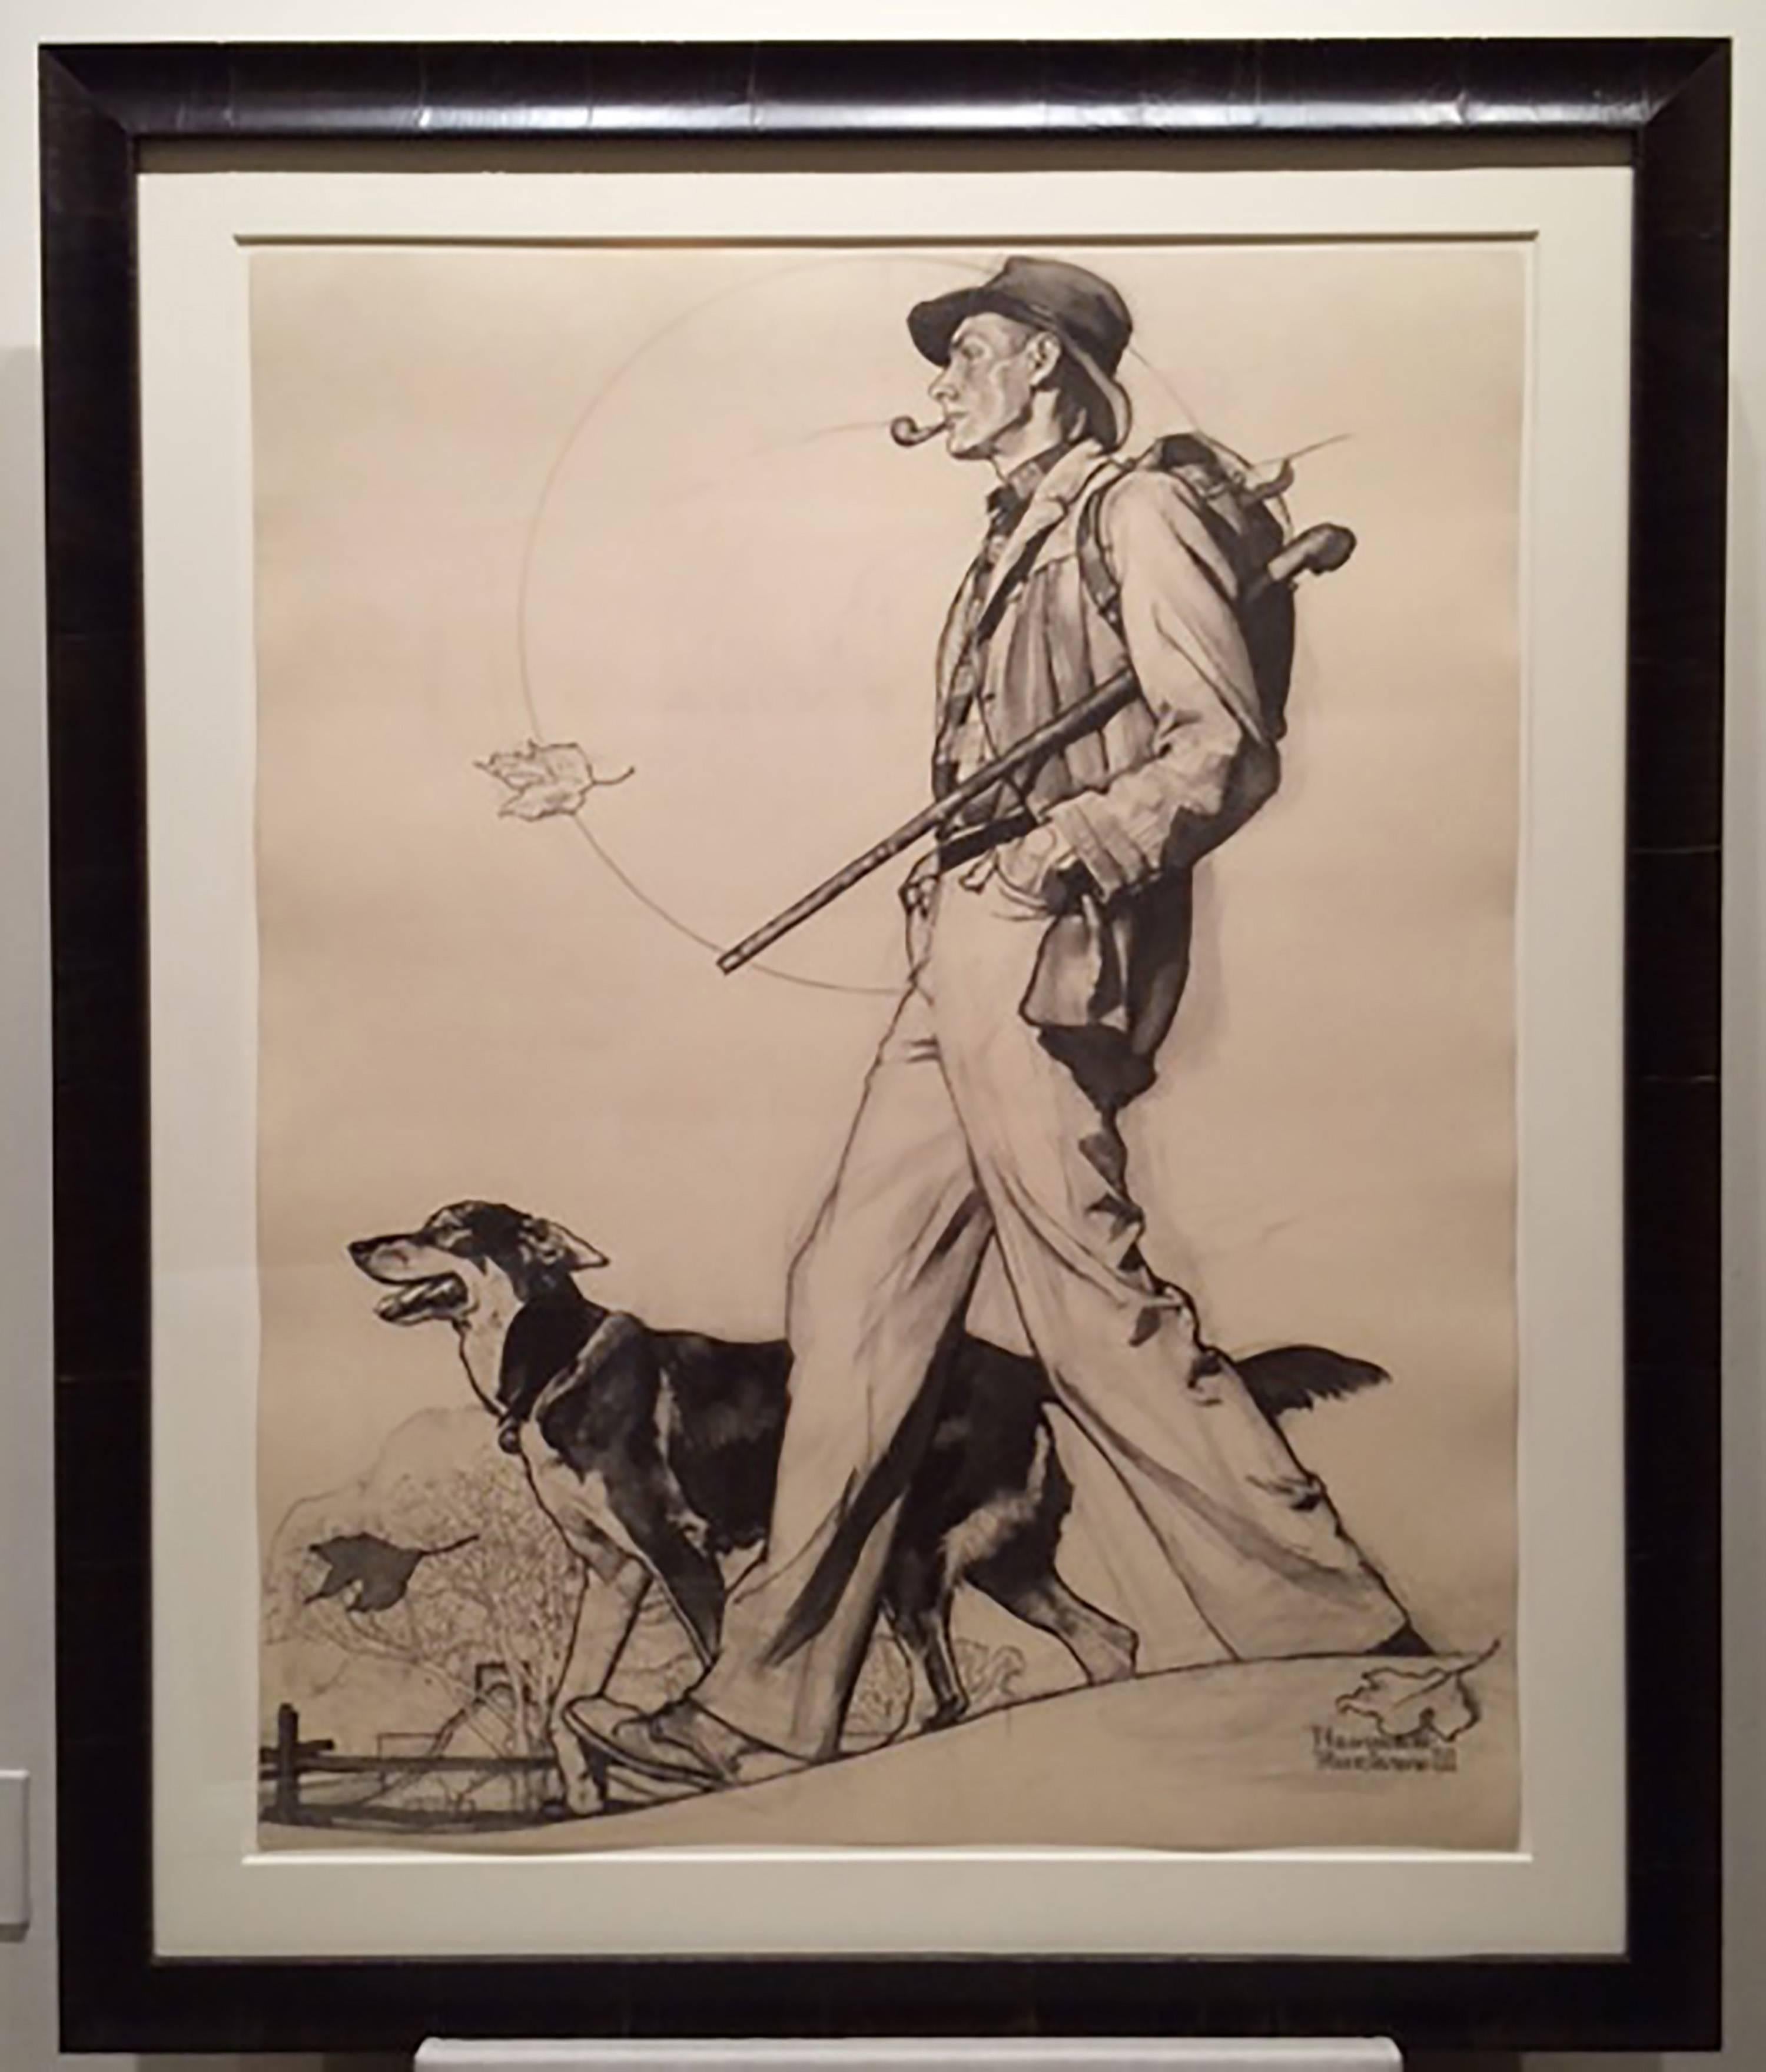 Hiking with Dog, Saturday Evening Post Cover Study  - Art by Norman Rockwell